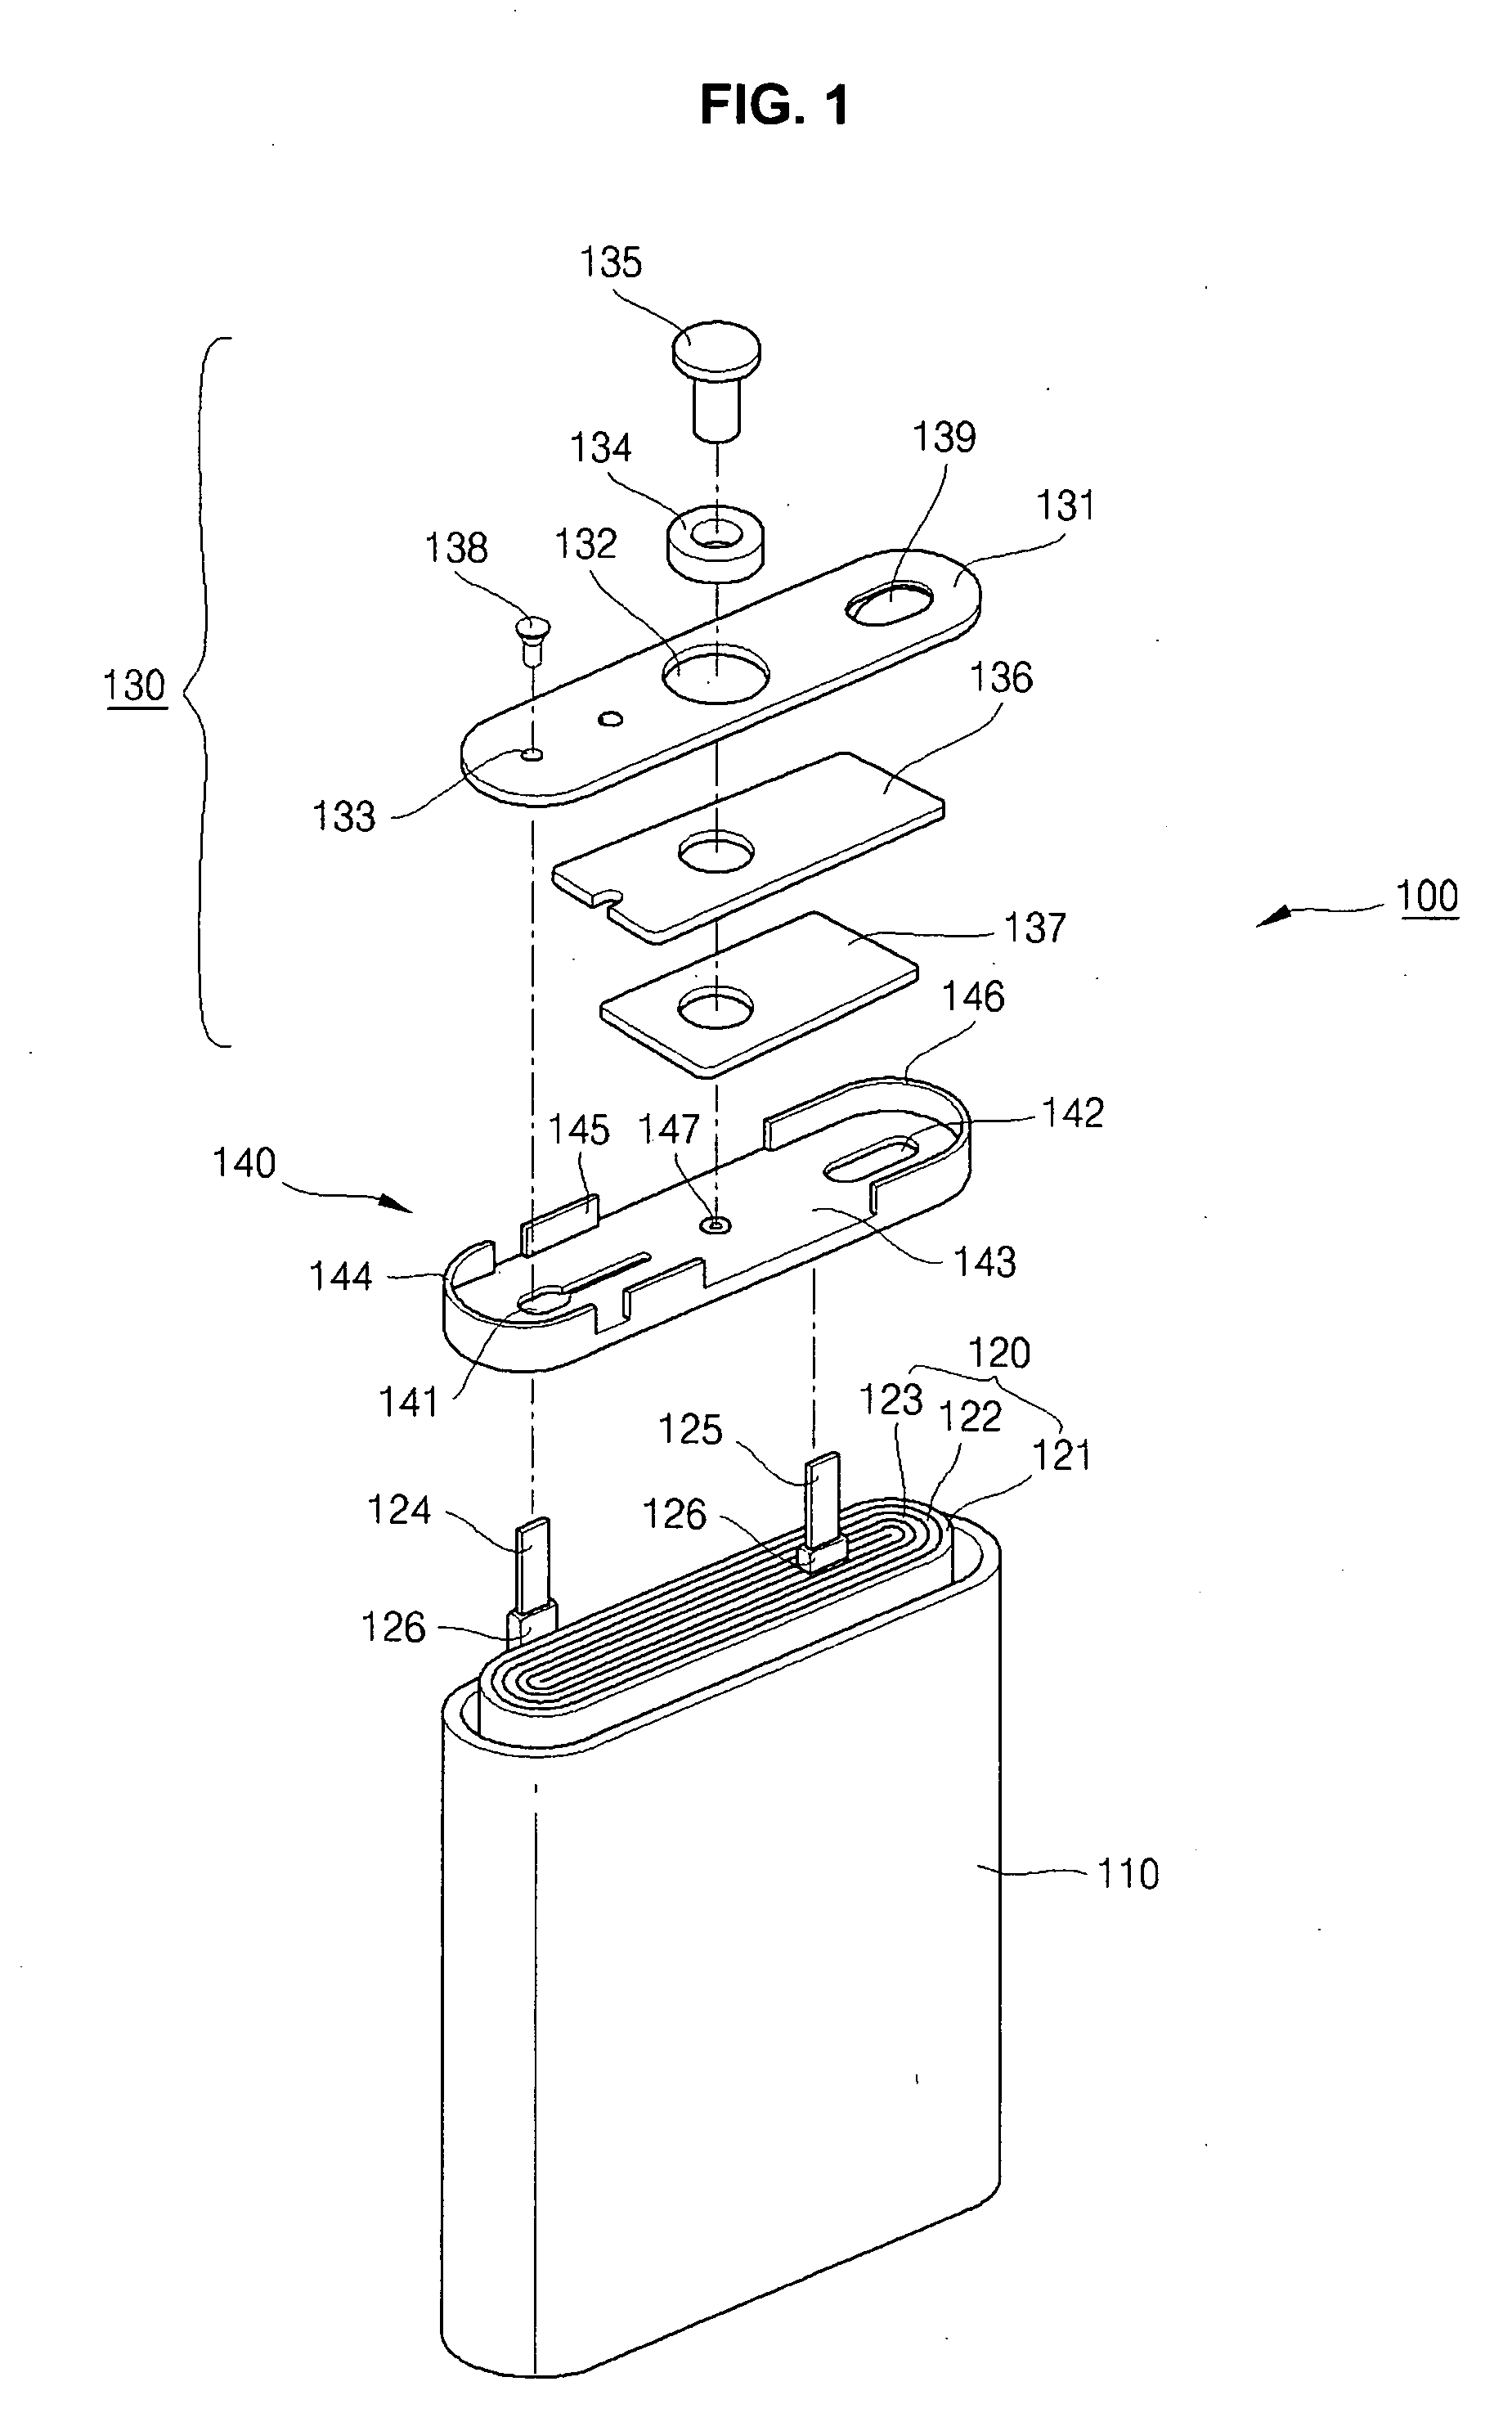 Secondary battery and the fabrication method thereof